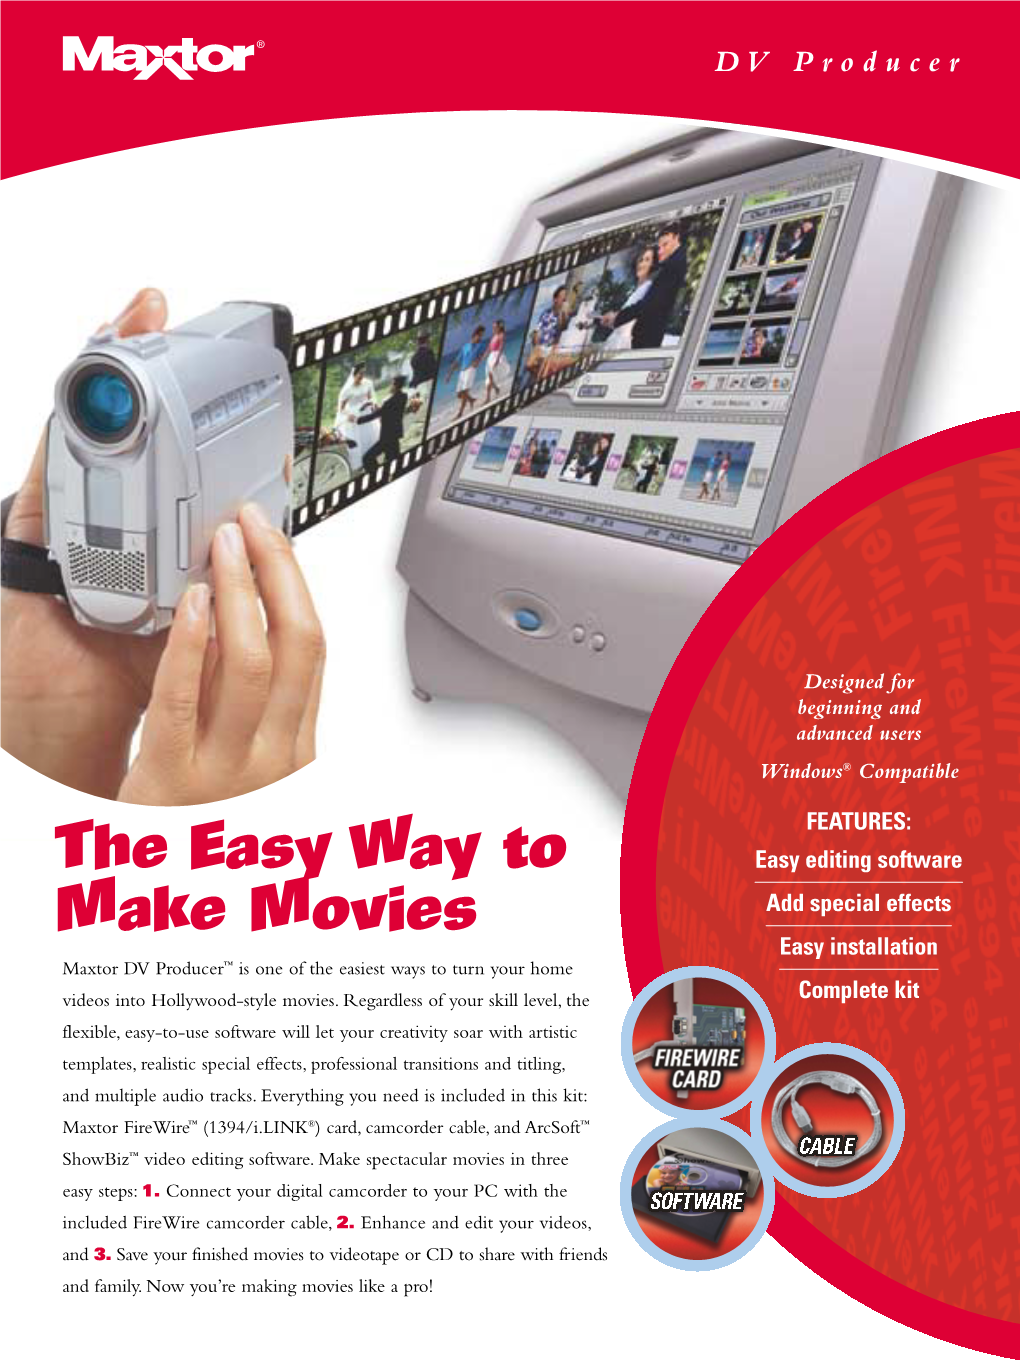 The Easy Way to Make Movies